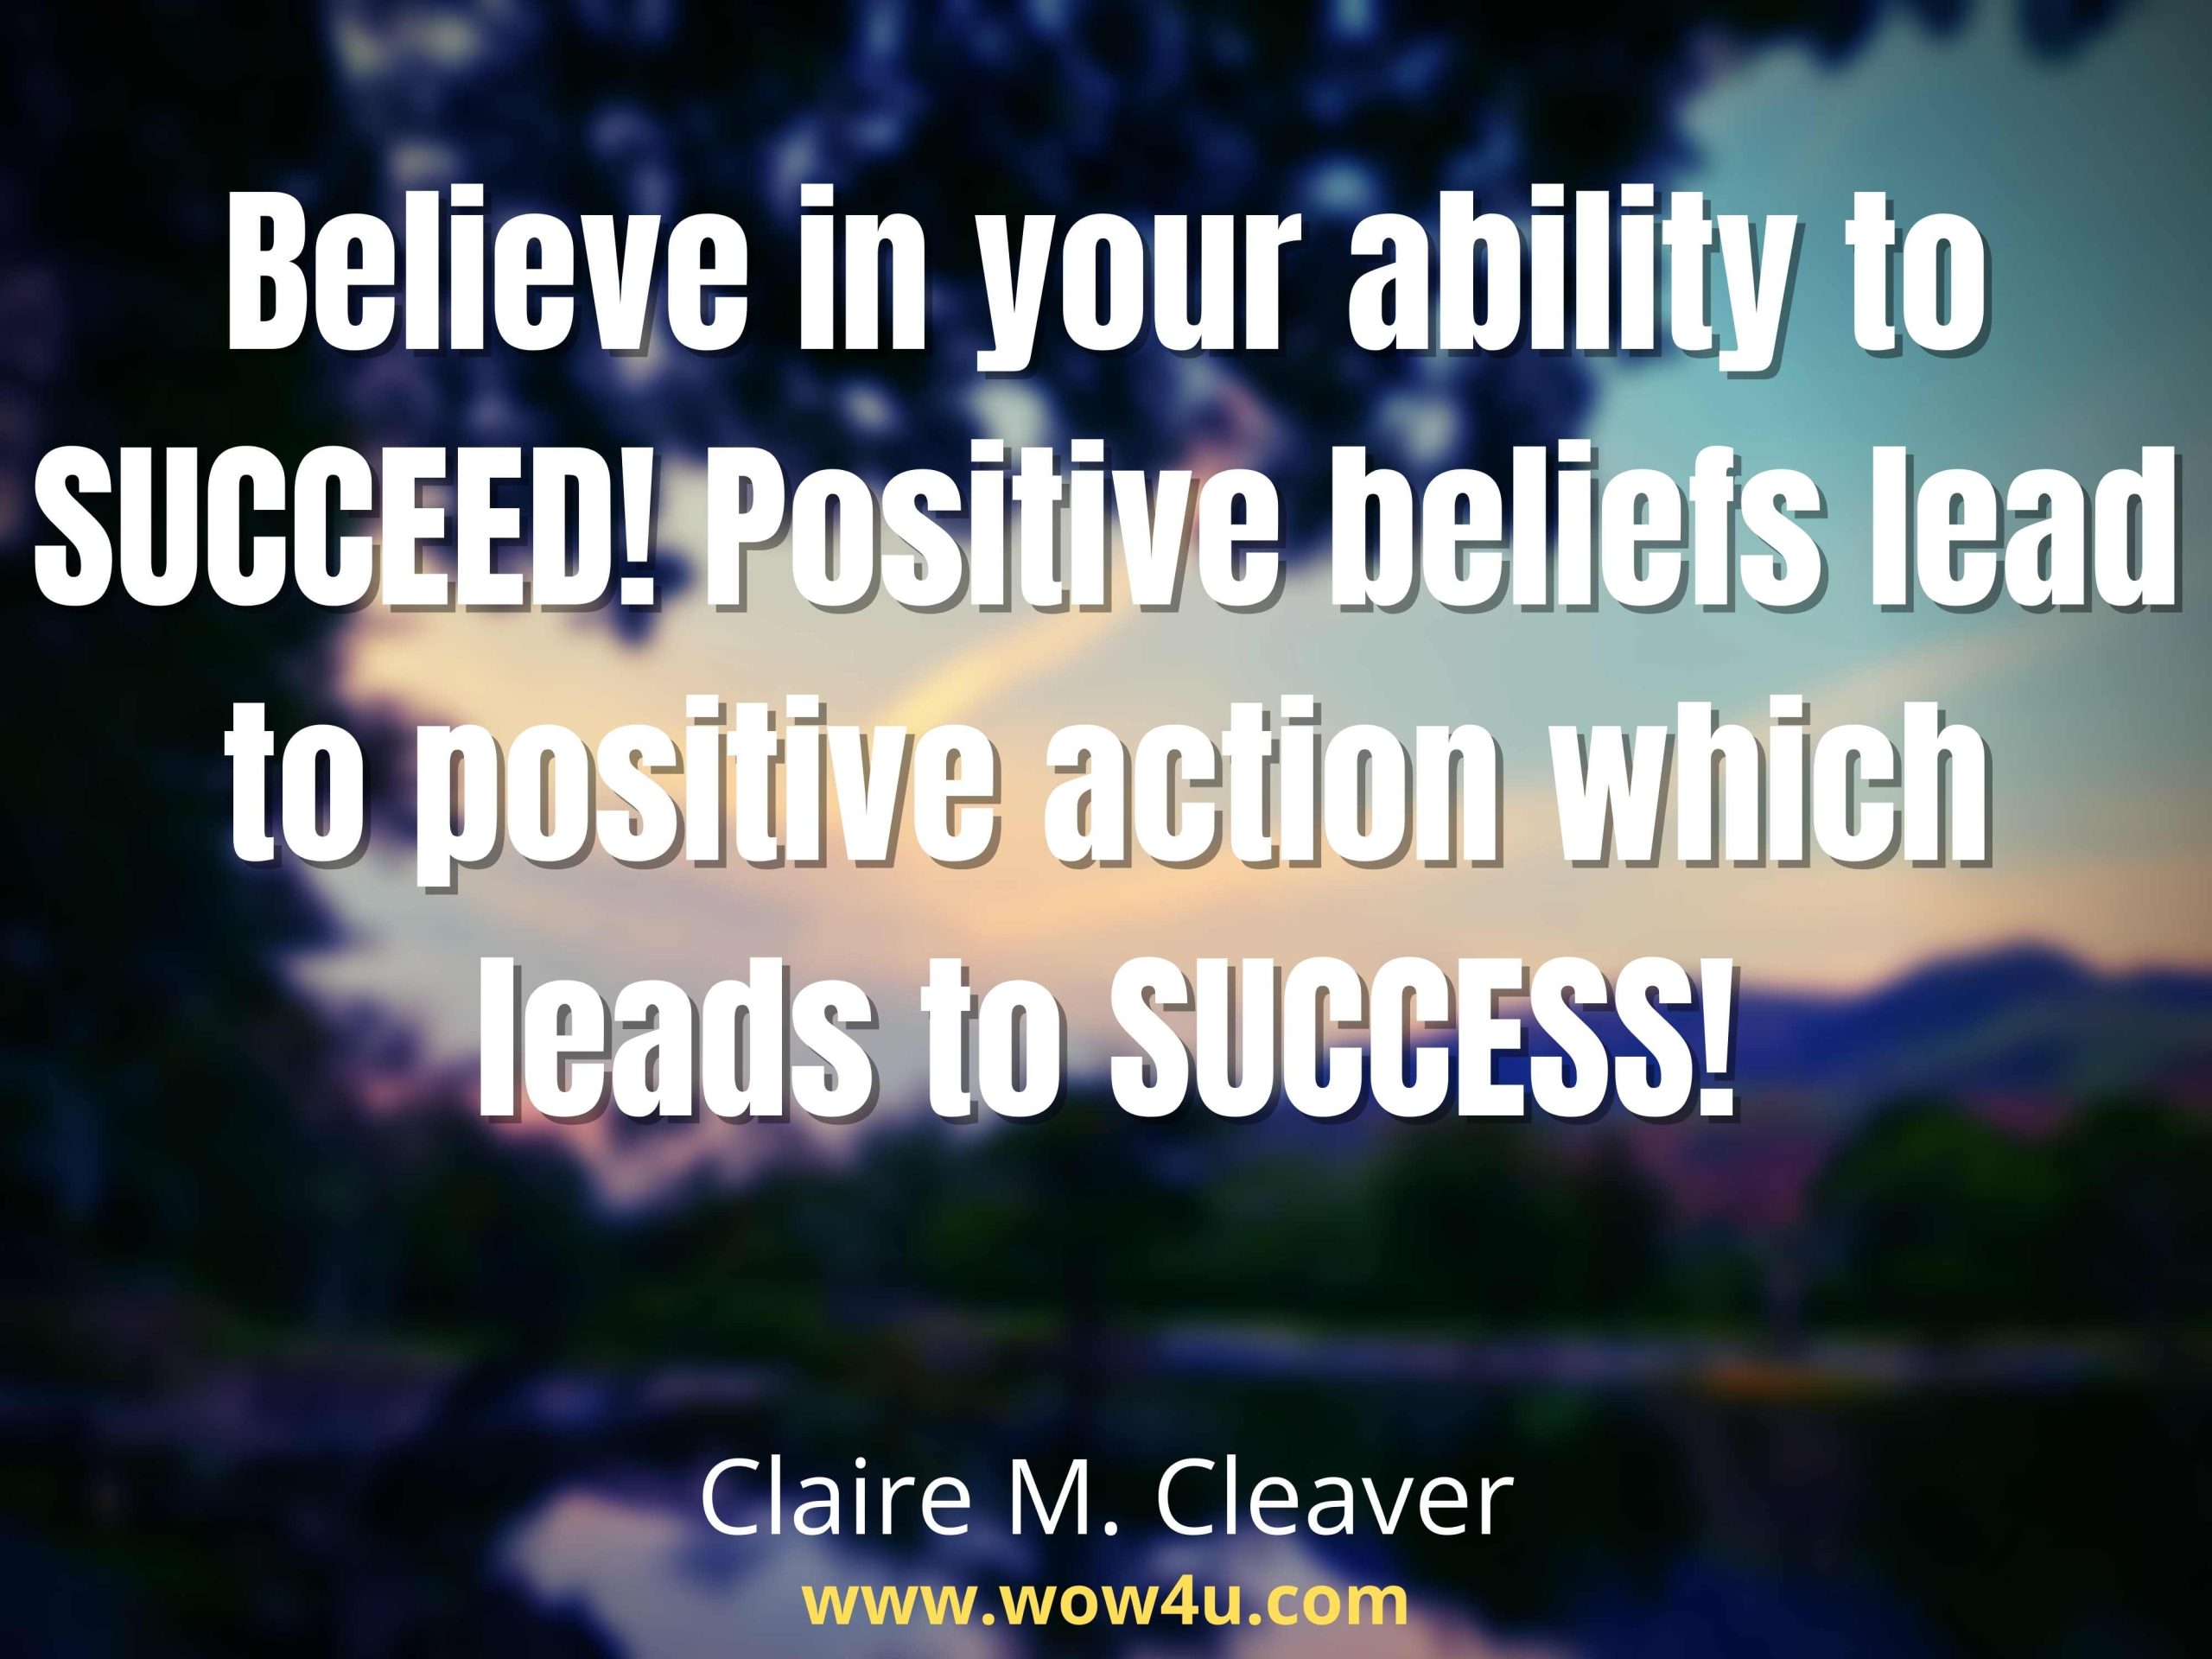 Believe in your ability to SUCCEED! Positive beliefs lead to positive action which leads to SUCCESS! Claire M. Cleaver, Step Into Sales.